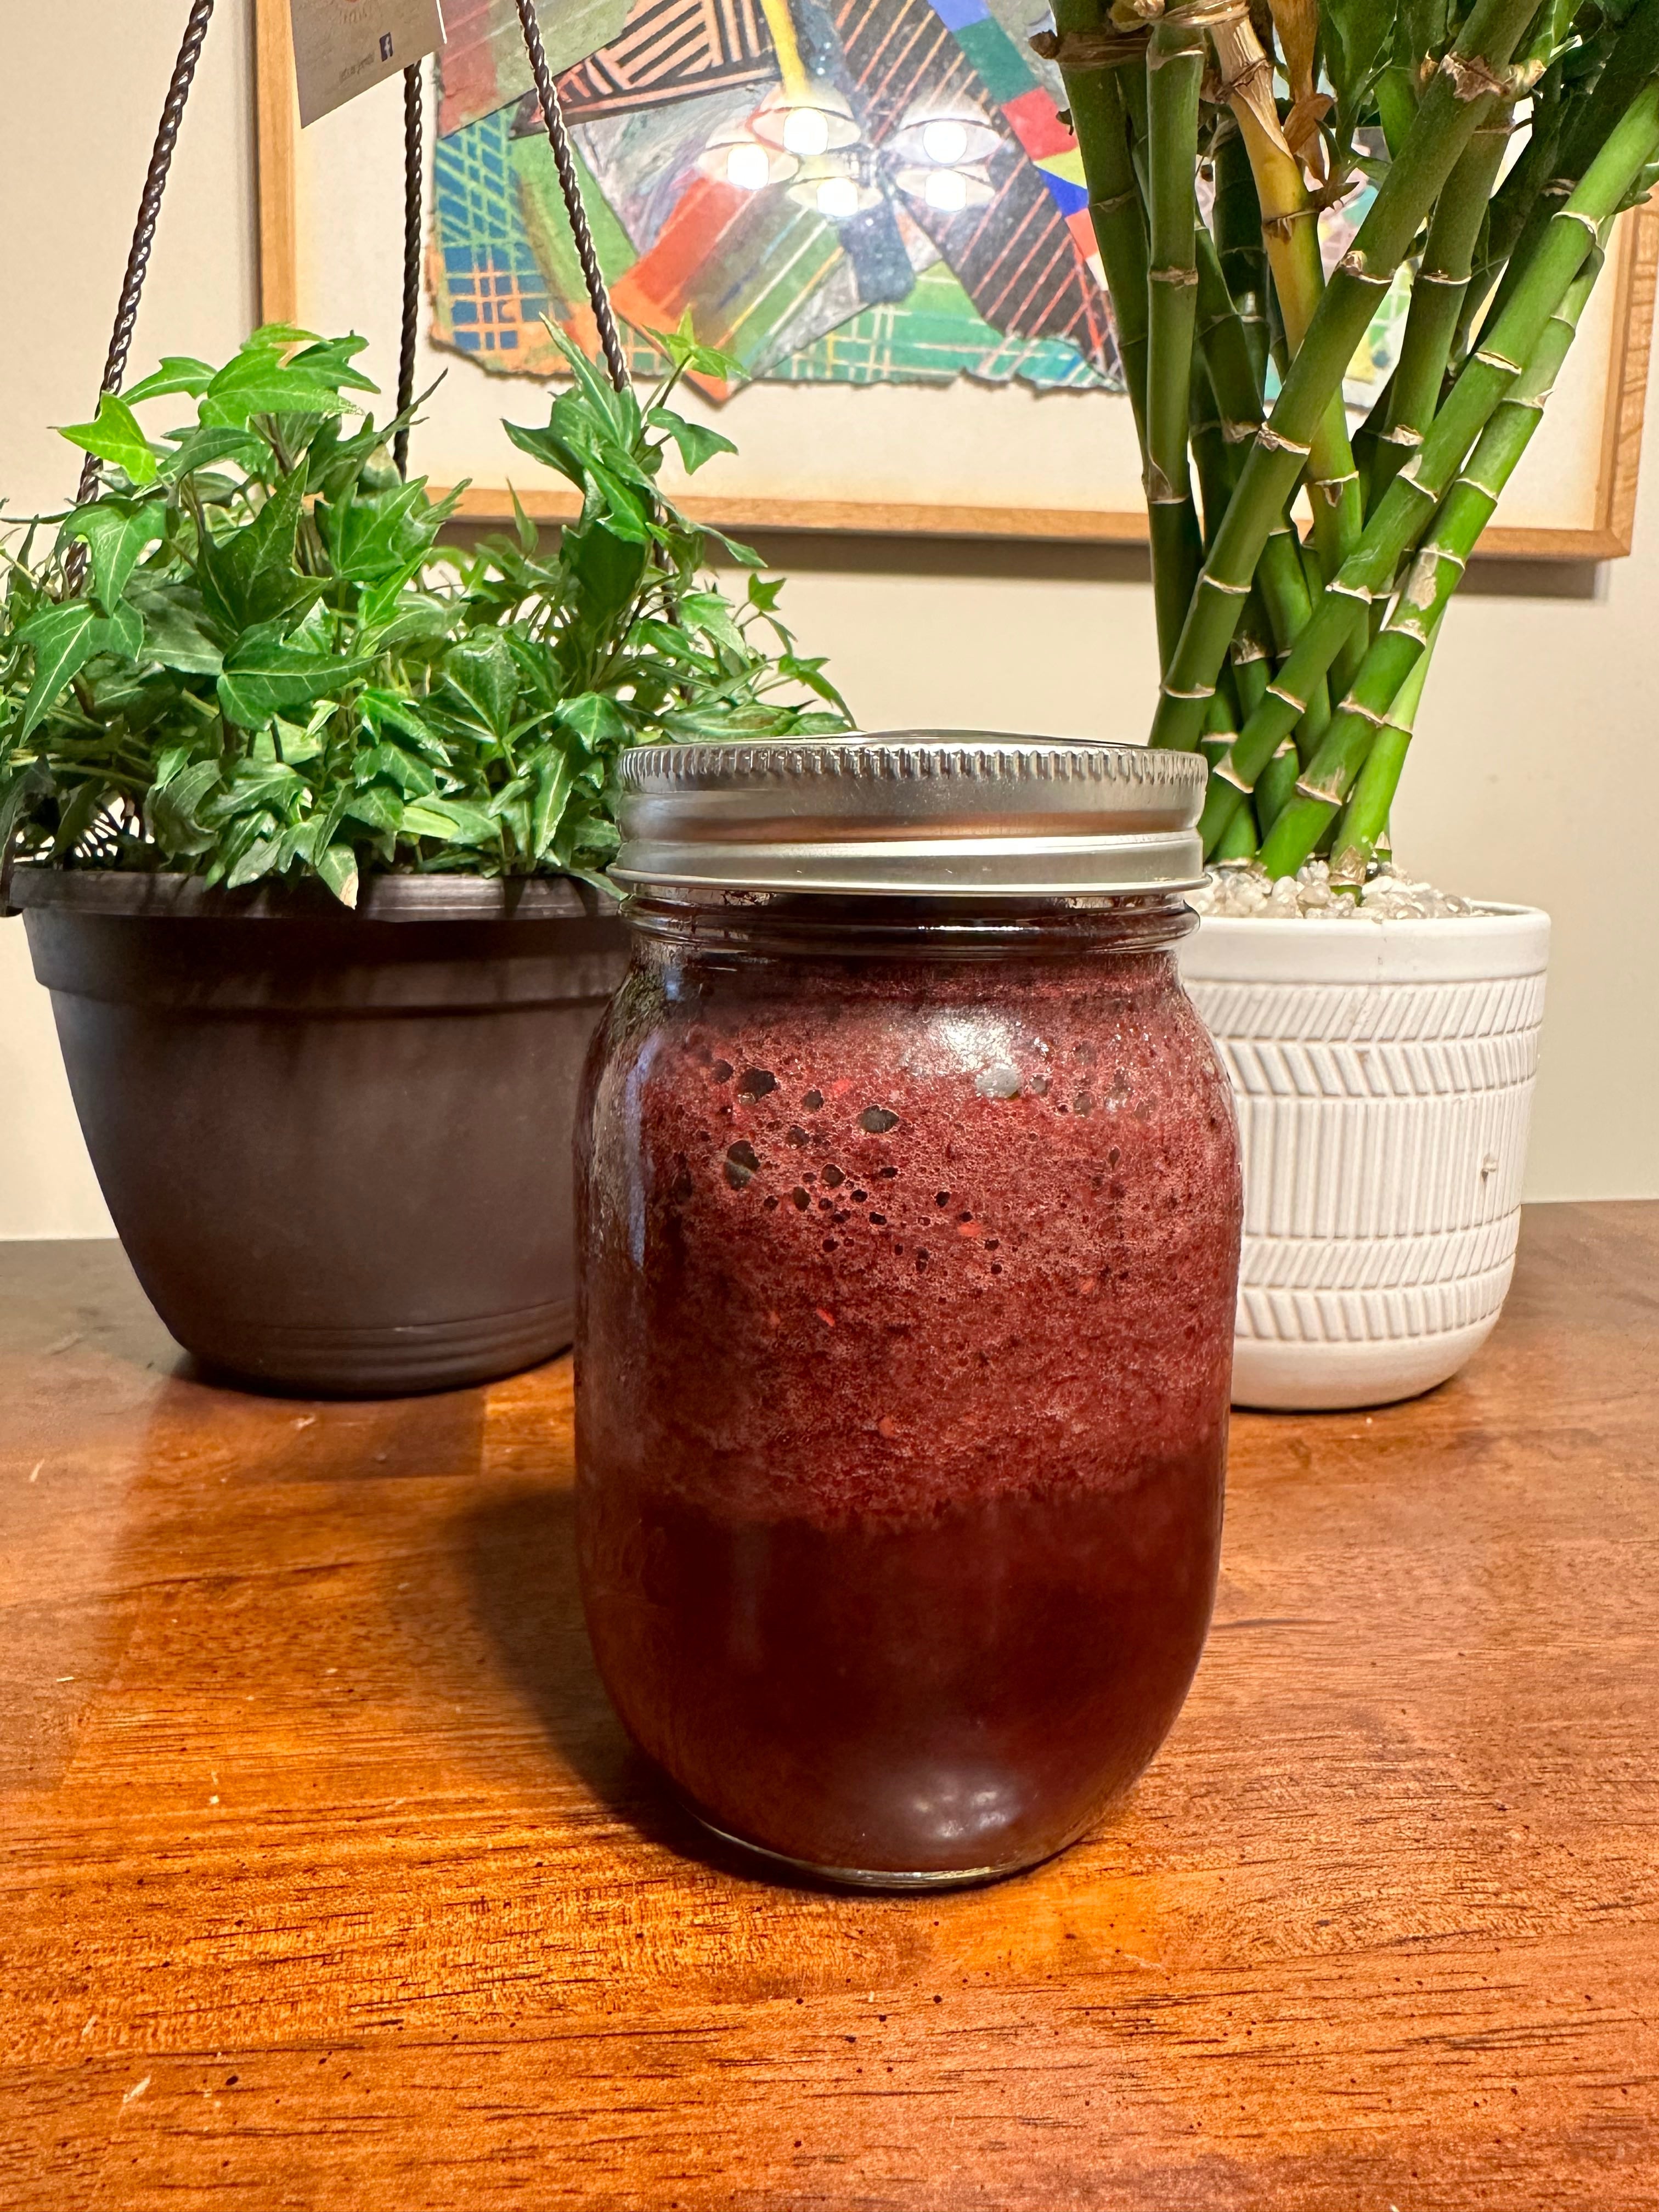 Elevate Your Health and Satisfy Your Sweet Tooth with the Very Berry Juice/Smoothie Recipe - Hollistic Human Shop